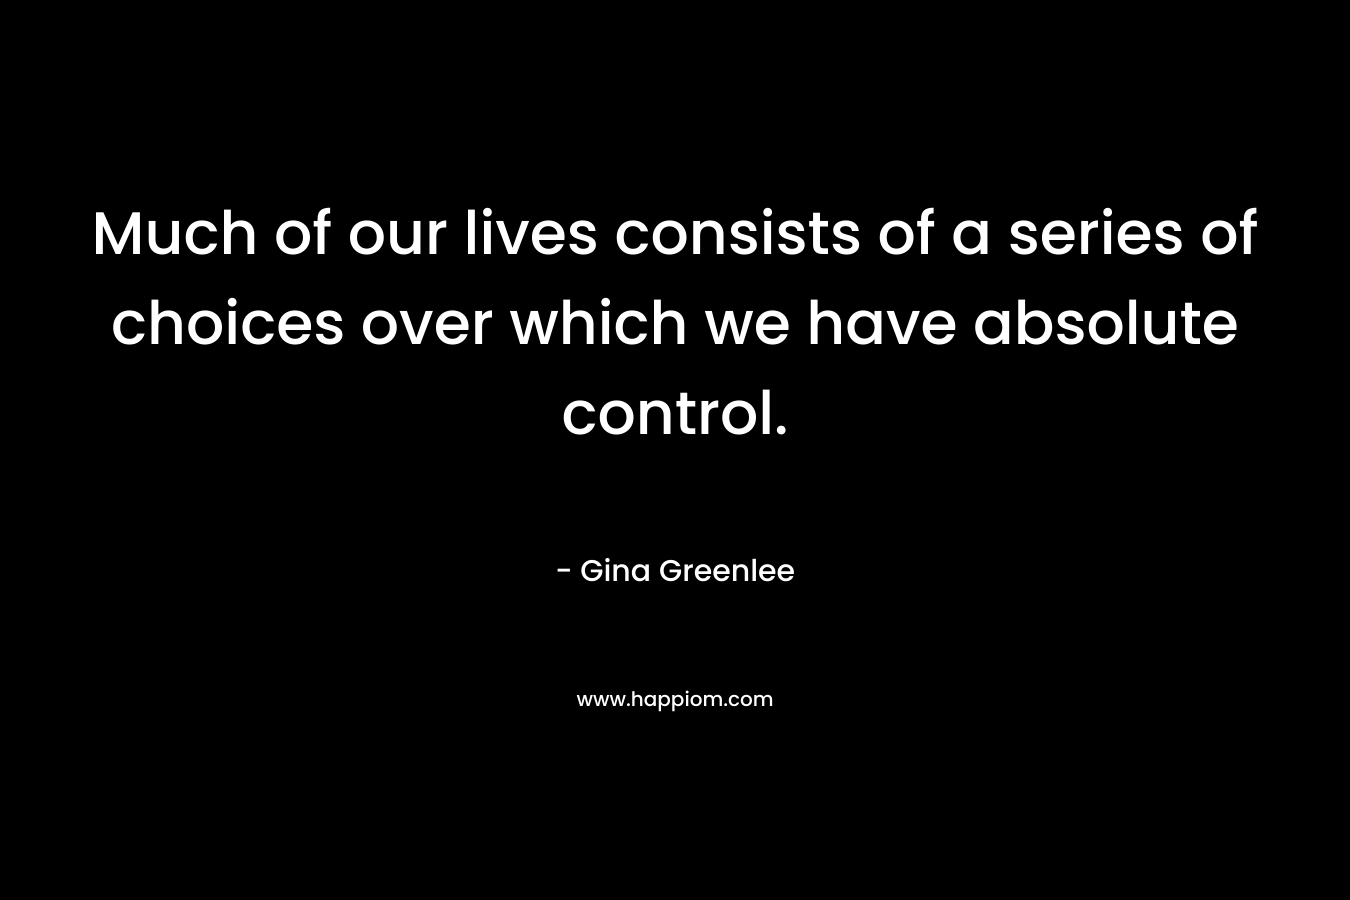 Much of our lives consists of a series of choices over which we have absolute control. – Gina Greenlee